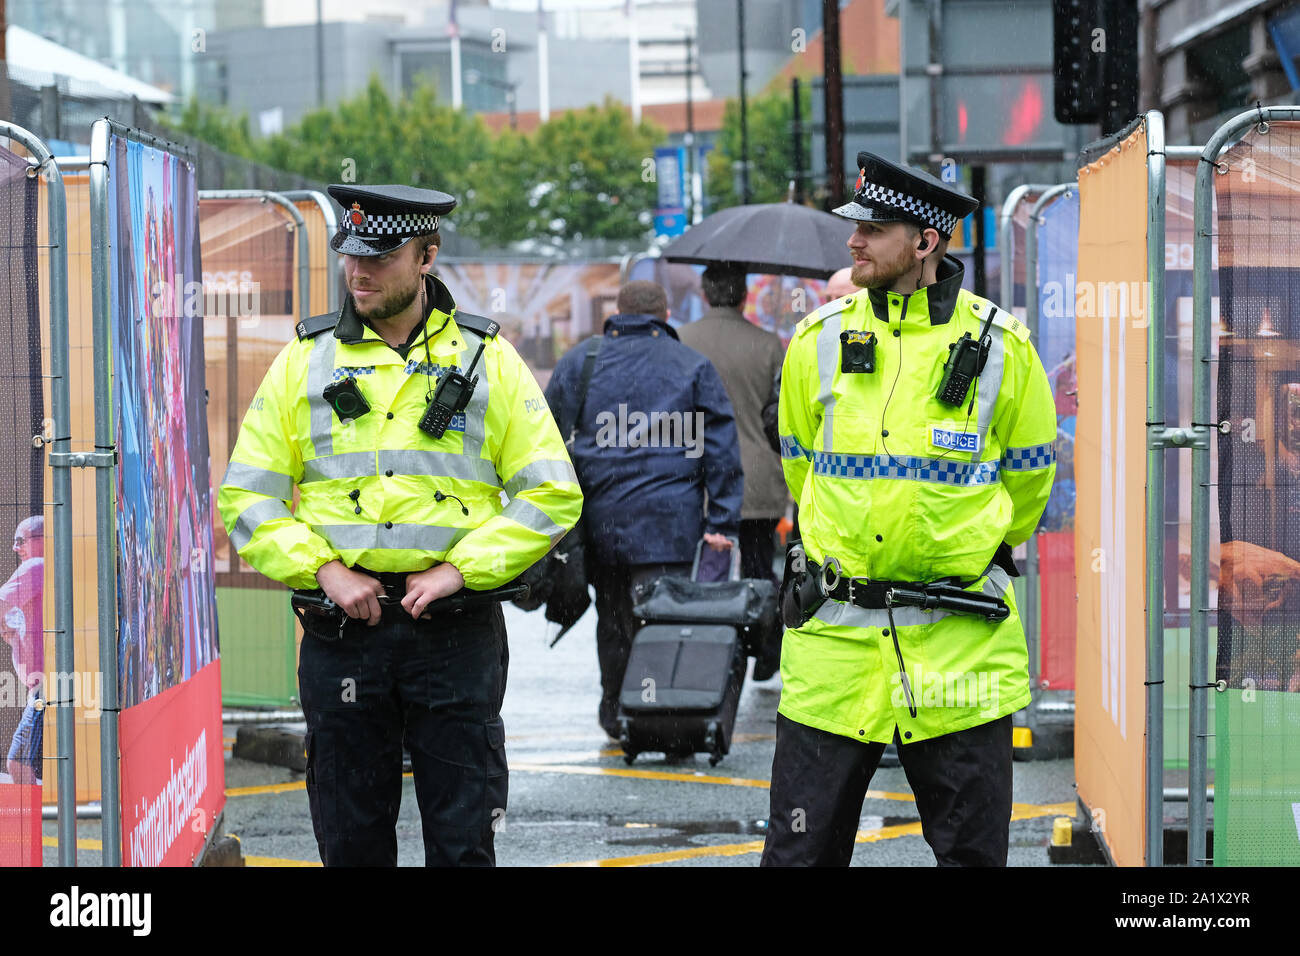 Manchester, UK – Sunday 29th September 2019.  Delegates pass through Police security at the Conservative Party Conference on the opening day of the Tory event.  Photo Steven May / Alamy Live News Stock Photo